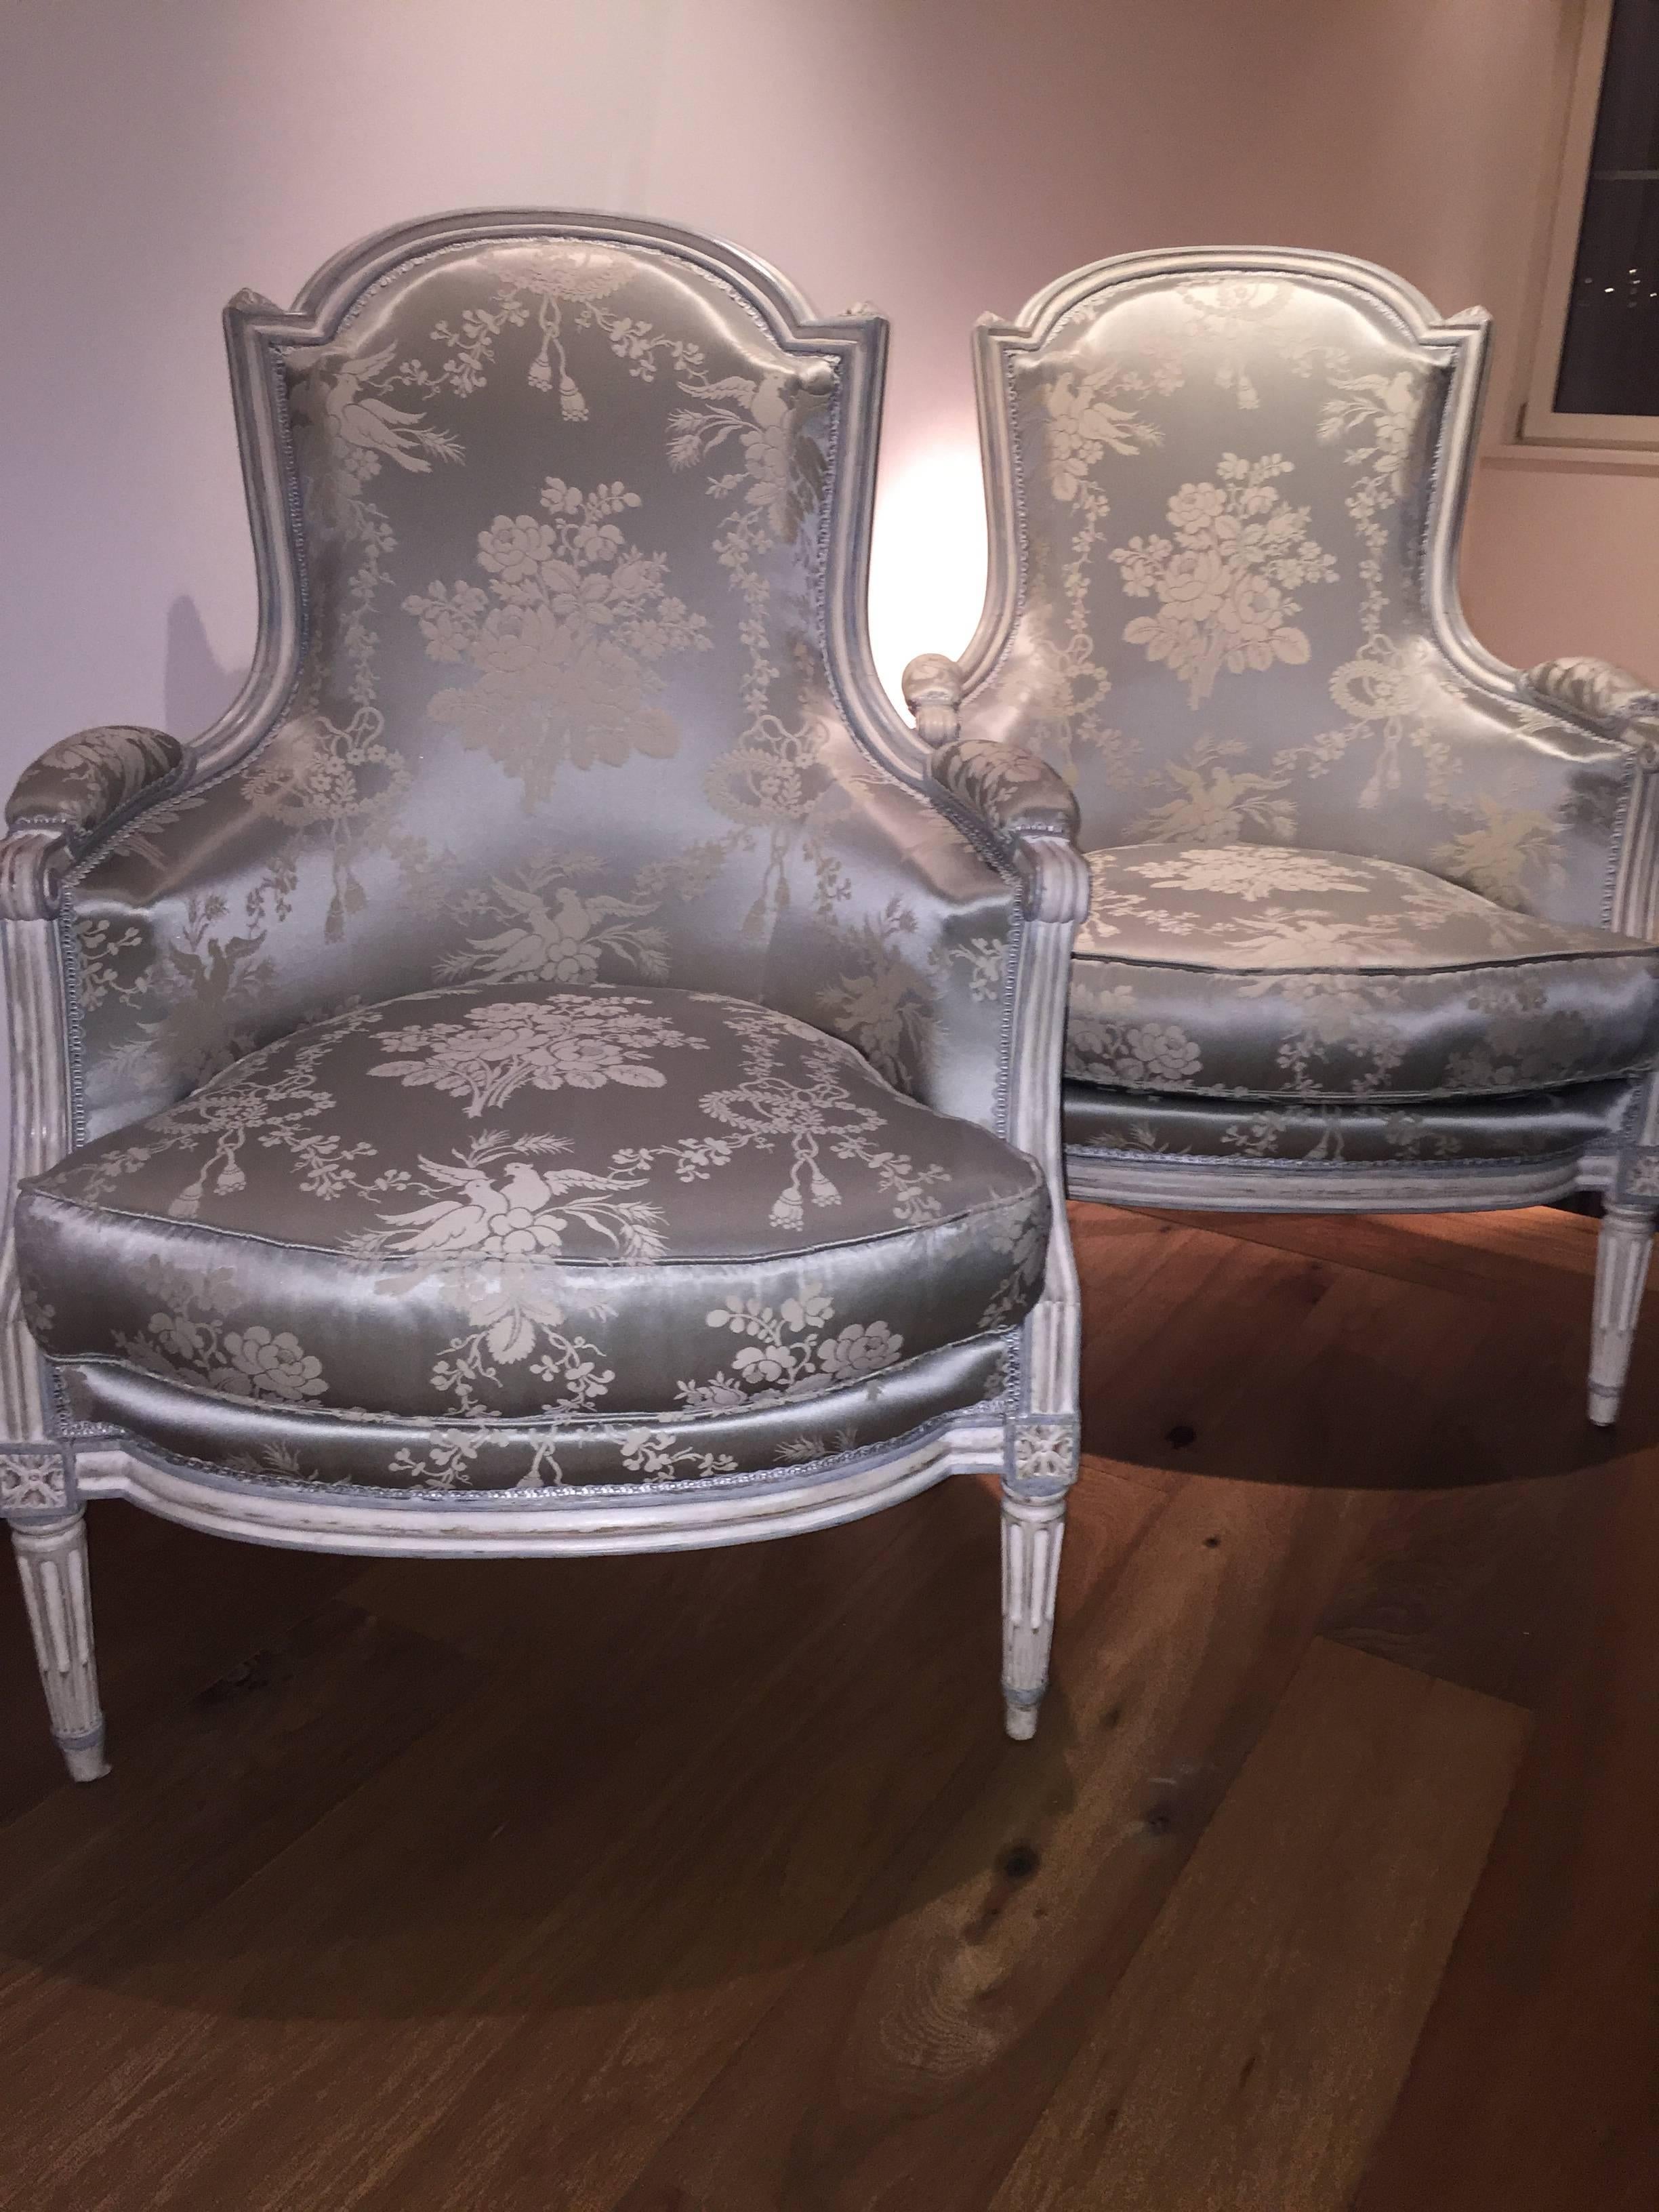 Pair of Louis XVI armchairs, period of the late 18th century, French origin, beech molded and sculpted rechampi cream highlighted with a blue border, basket handle folder, small feet spindles fluted rudentés. The seats are stamped Philippe Poirié,